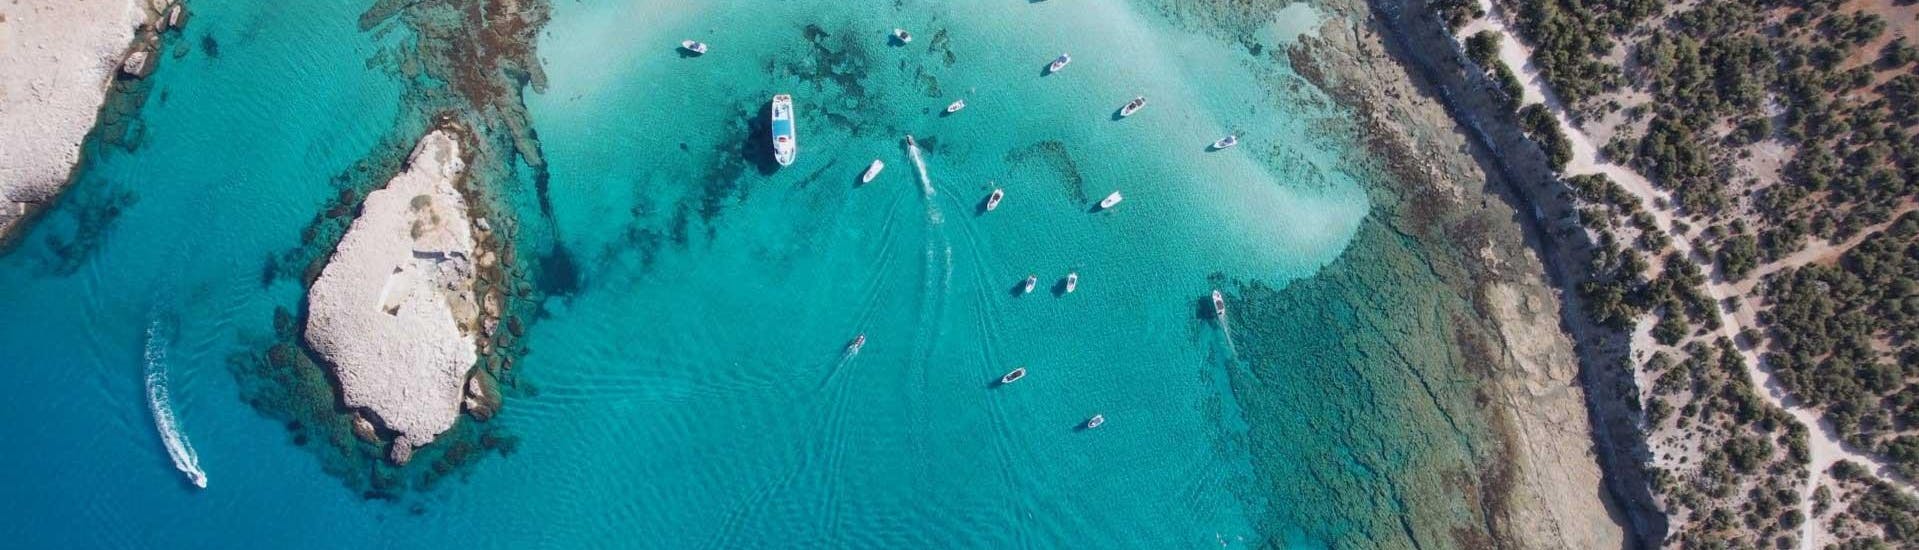 Picture of boats in blue water from George's Boat Rental.